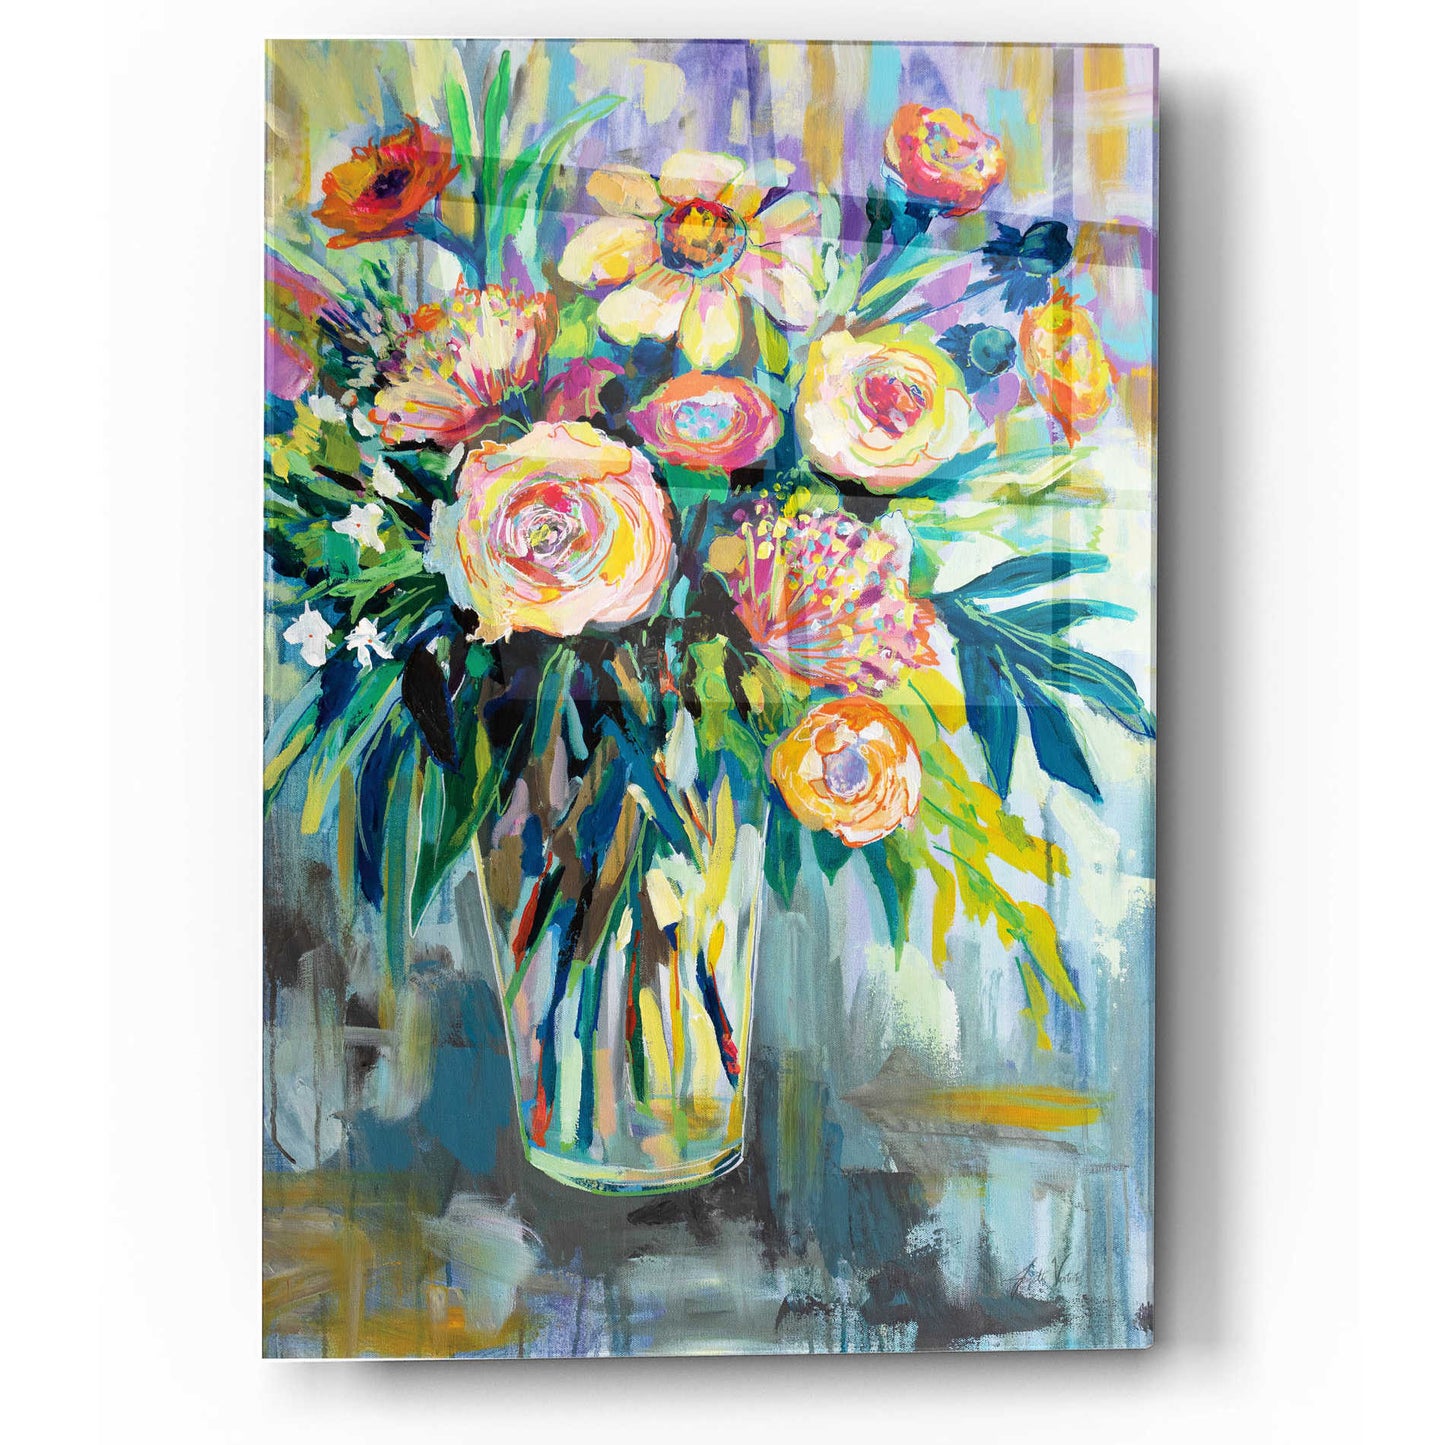 Epic Art 'Summer Happiness' by Jeanette Vertentes, Acrylic Glass Wall Art,12x16